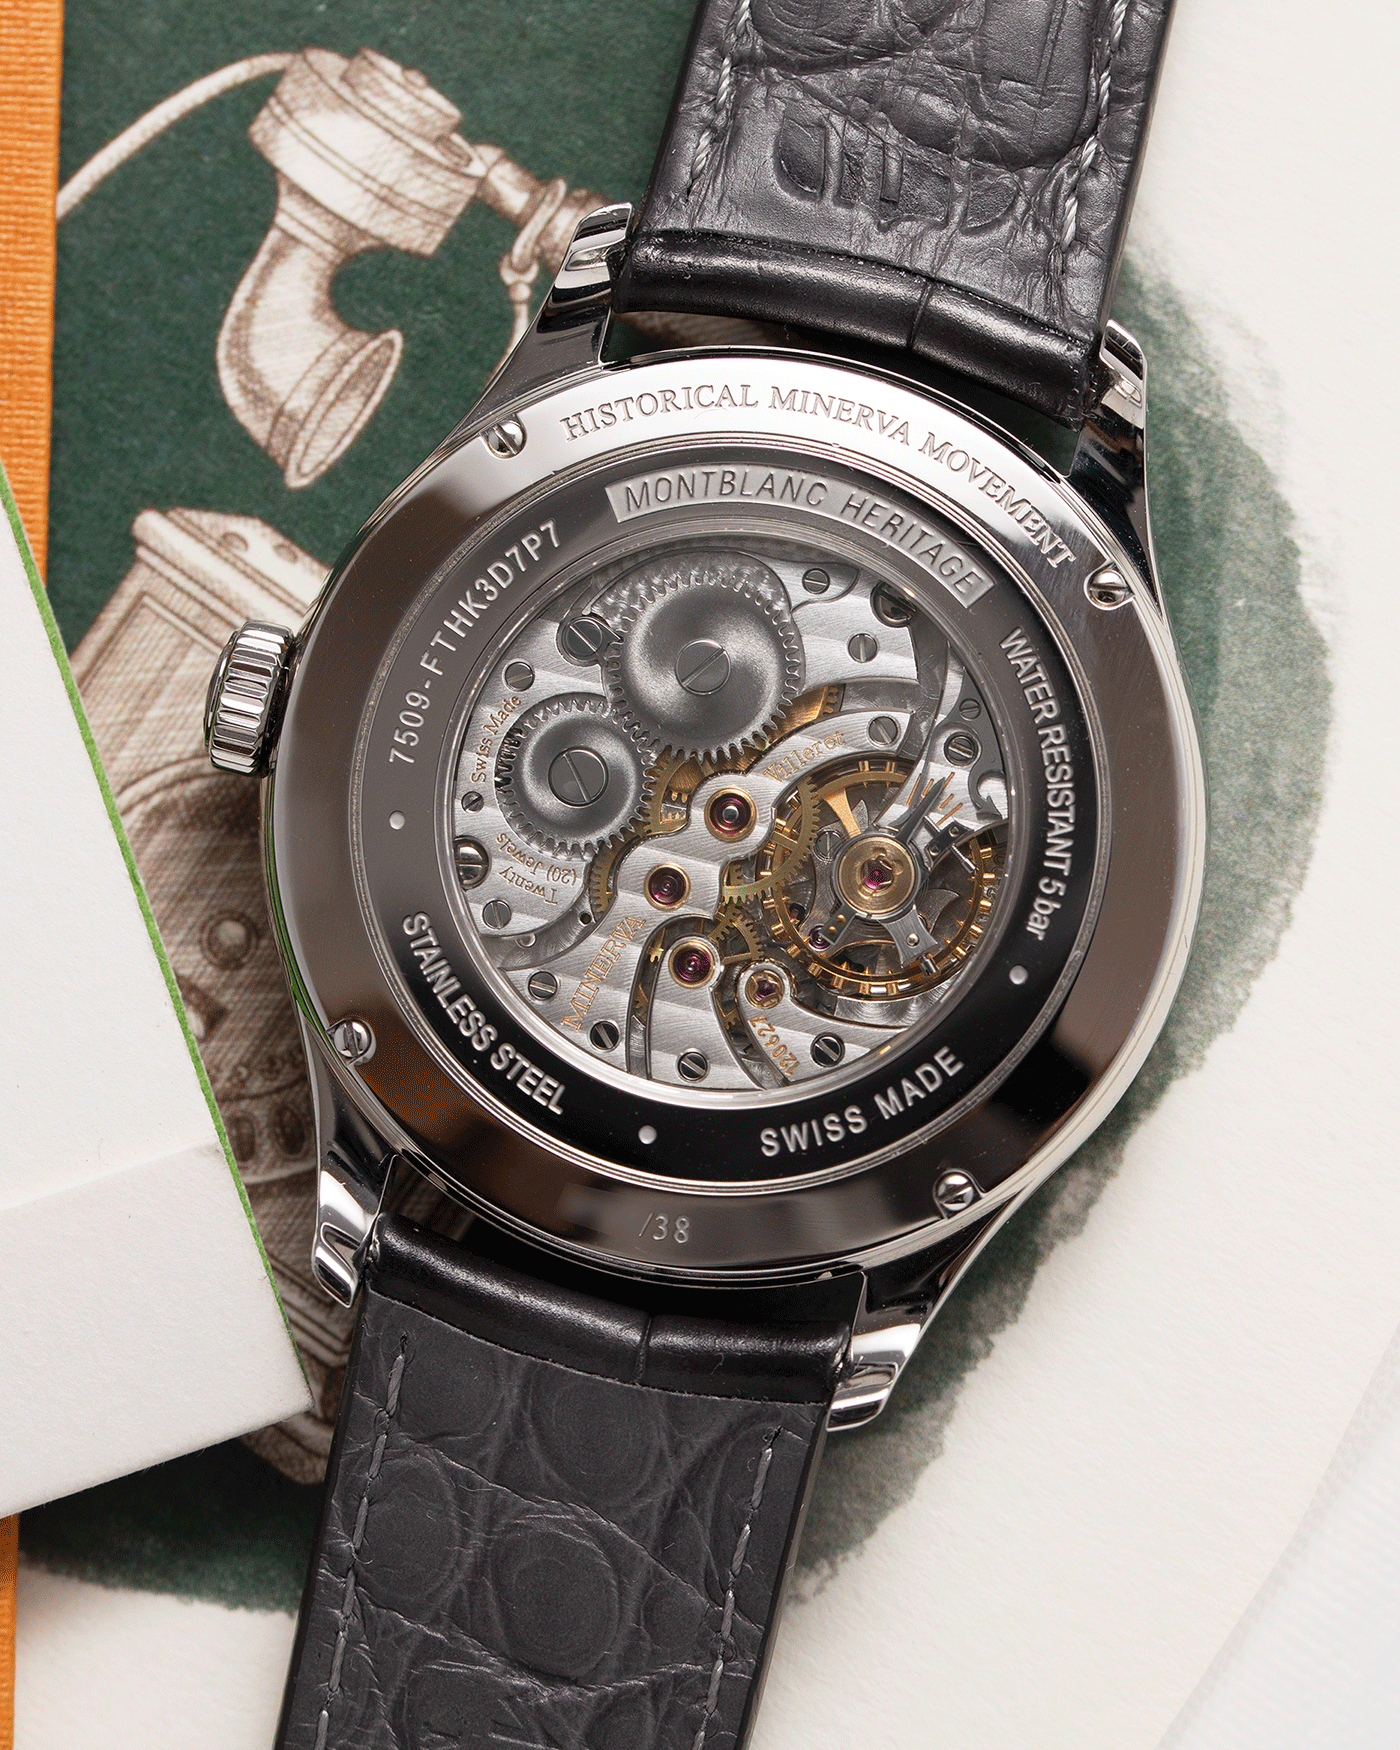 Brand: Mont Blanc Year: 2020 Model: Heritage Small Seconds Material: Stainless Steel Movement: New Old Stock Historic Minerva MB M62.00 Case Diameter: 39mm Bracelet: Mont Blanc Dark Grey Sfumato Alligator Strap with Stainless Steel Deployant